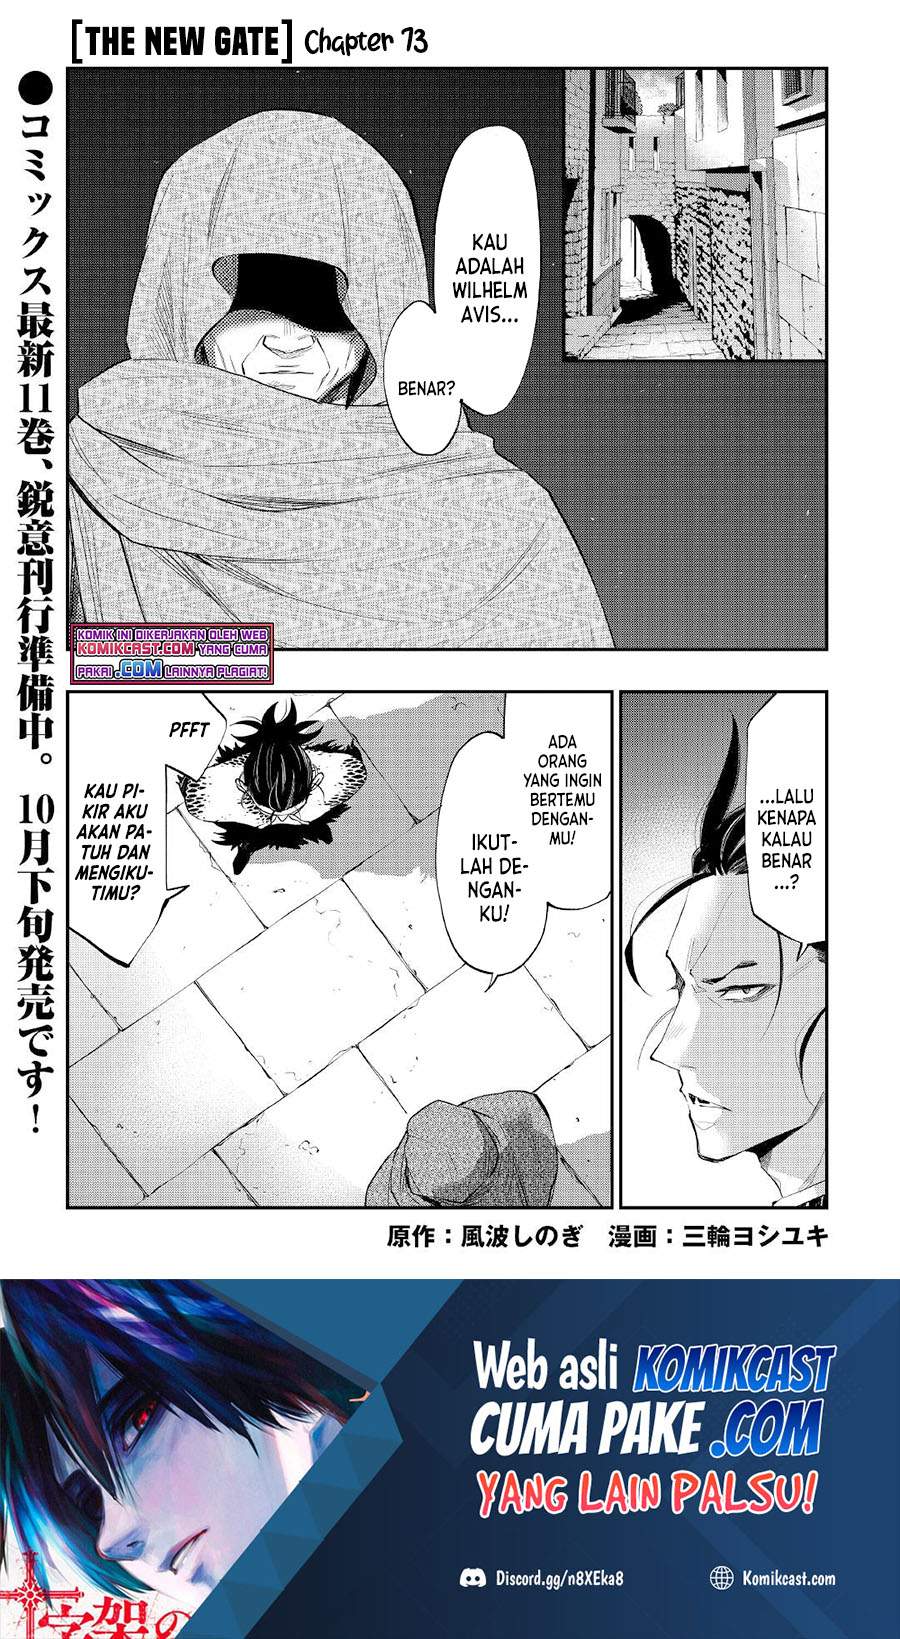 The New Gate Chapter 73